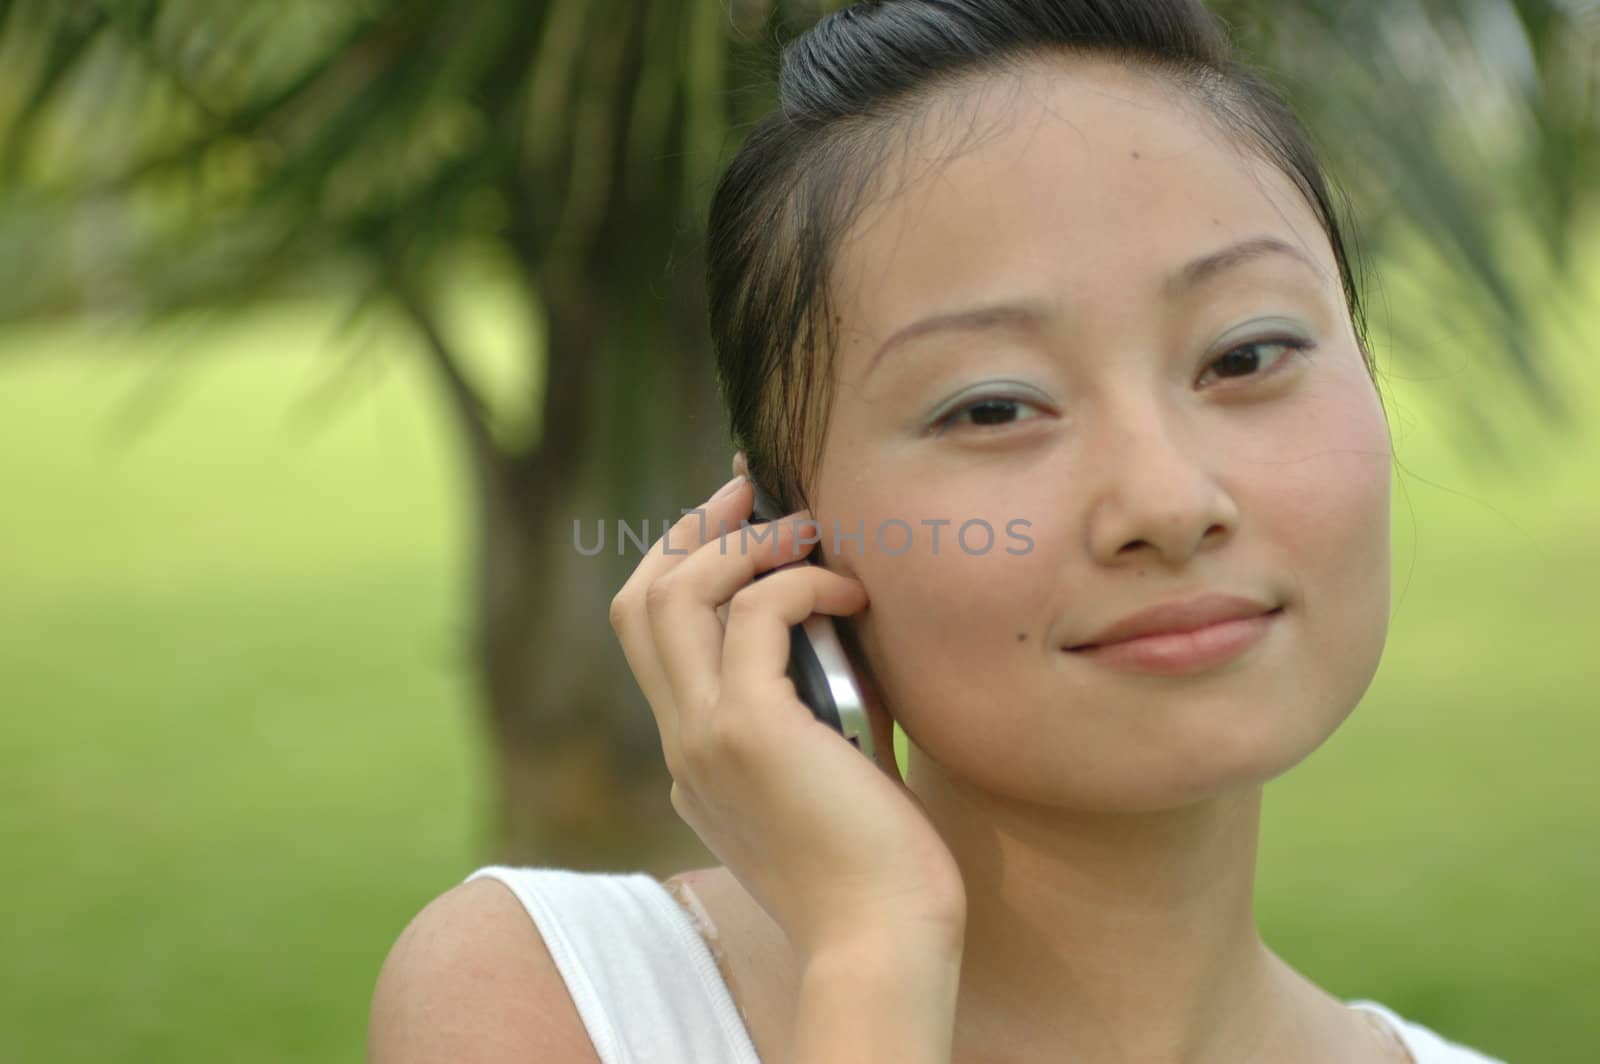 Chinese girl holding cellphone in her hand.